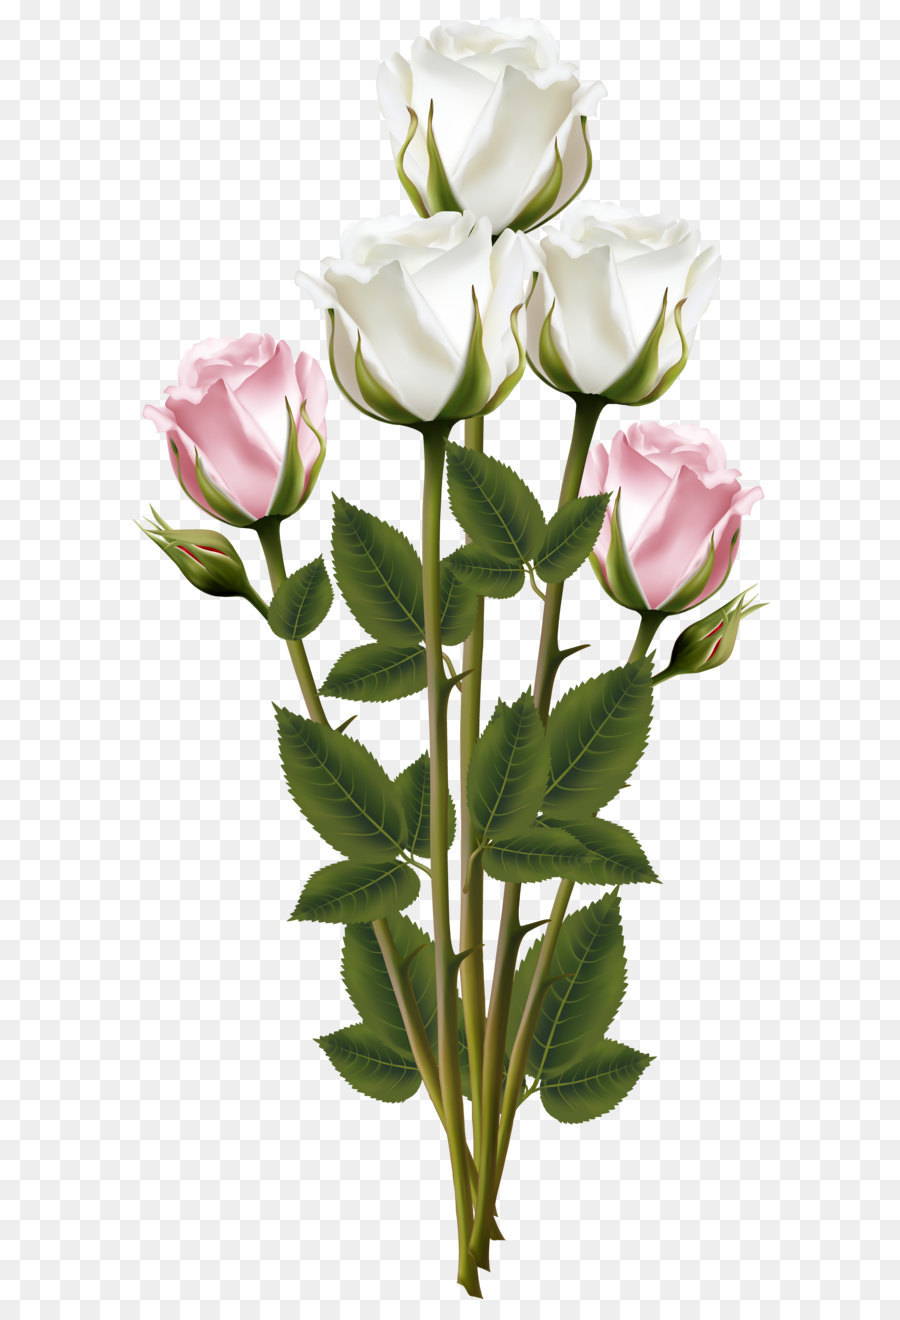 Flower bouquet Scalable Vector Graphics - White and Pink Rose Bouquet Transparent PNG Clip Art Image png download - 3463*7000 - Free Transparent Rose png Download.